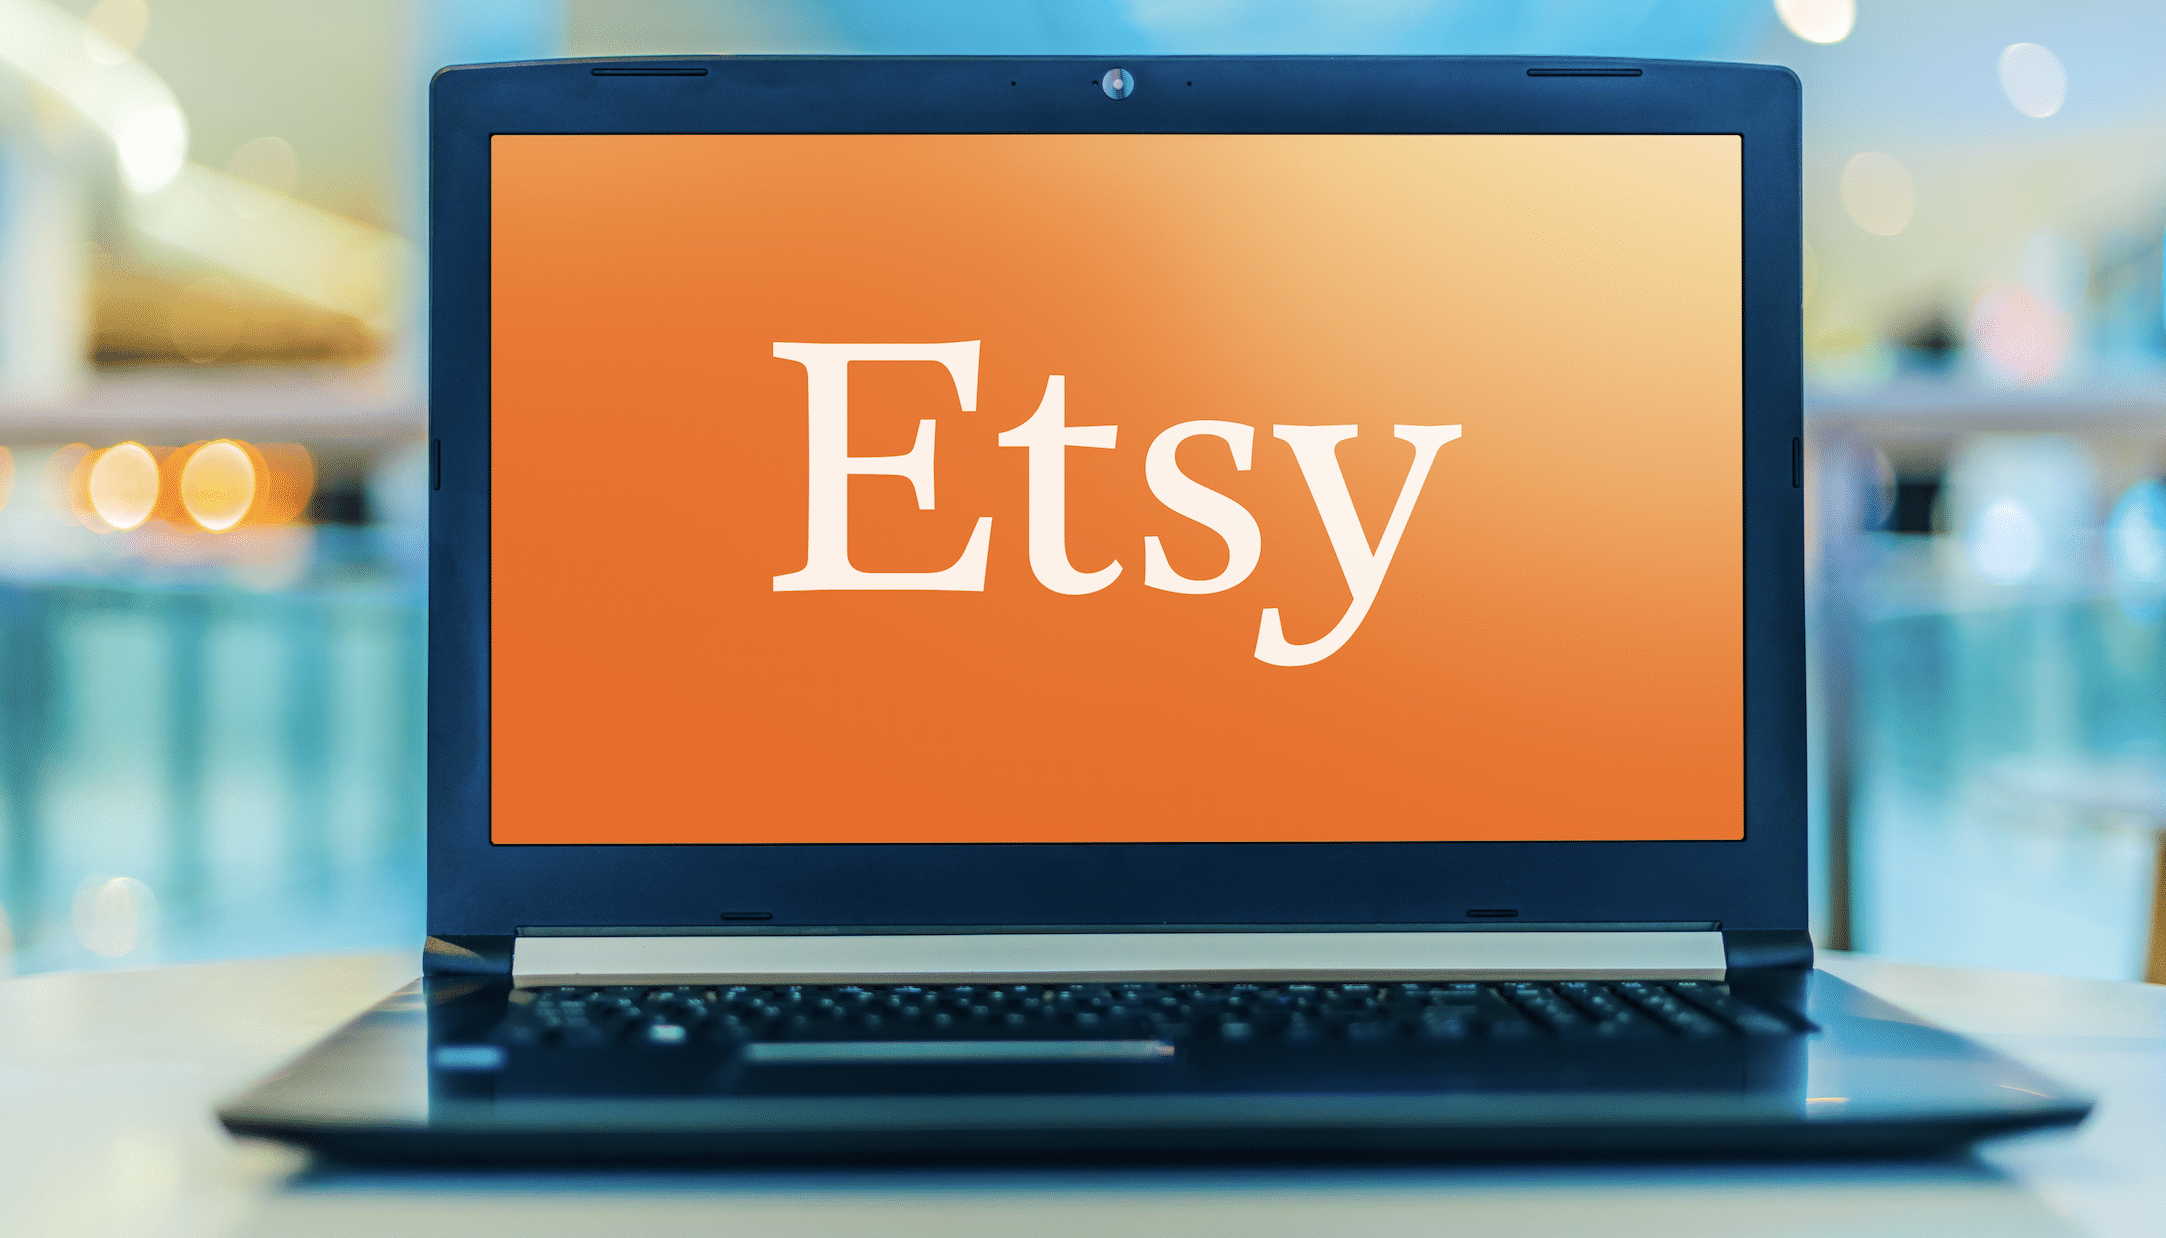 computer screen with the Etsy logo